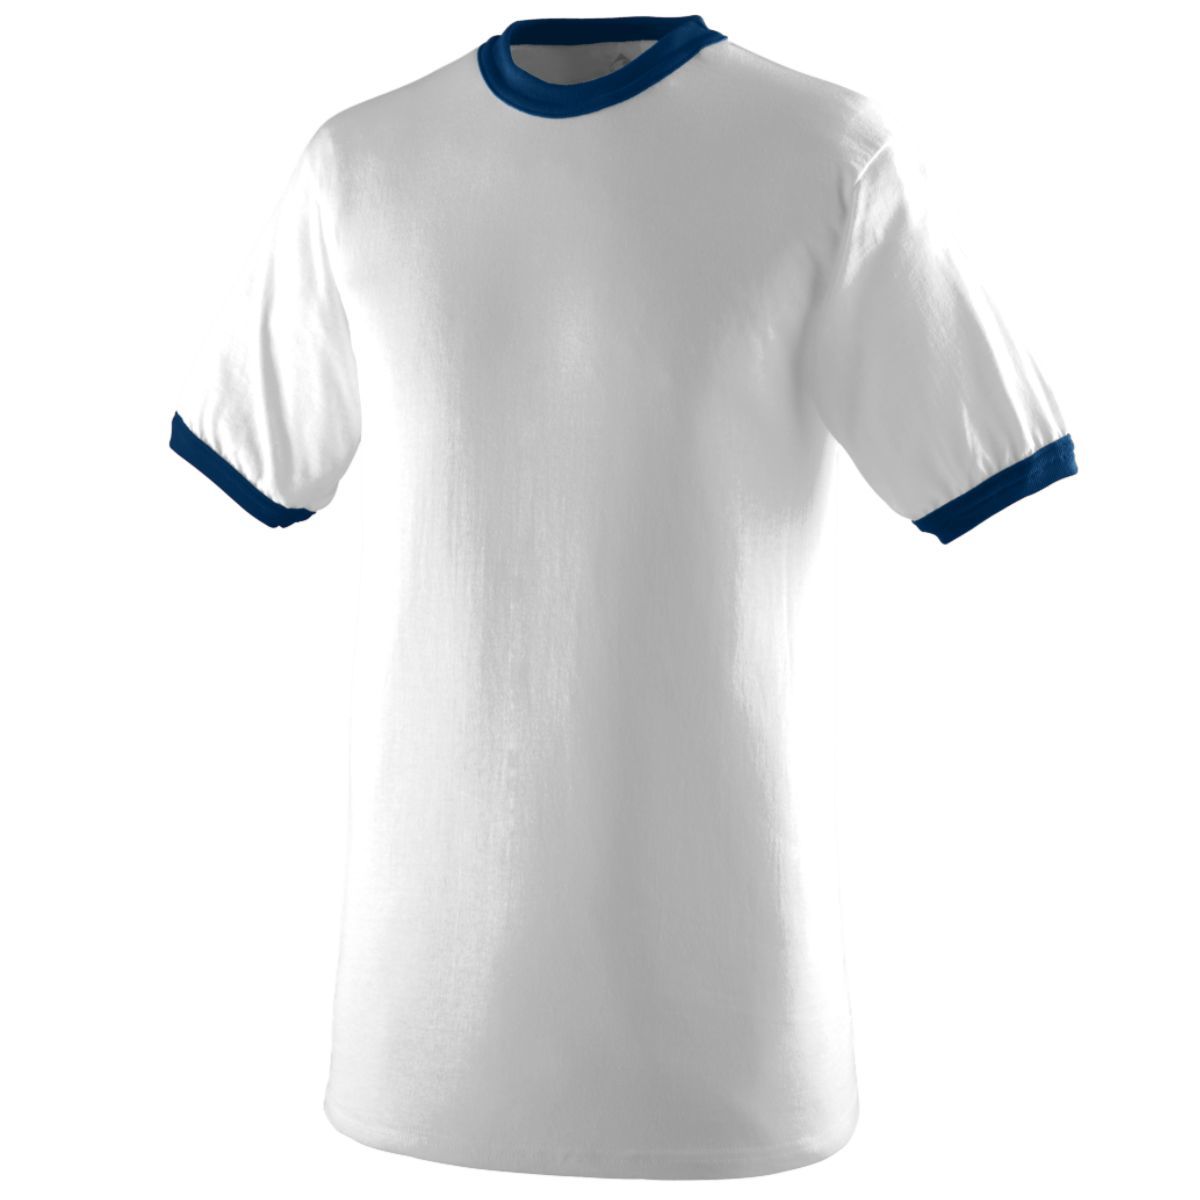 Augusta Sportswear Youth-Ringer T-Shirt in White/Navy  -Part of the Youth, Youth-Tee-Shirt, T-Shirts, Augusta-Products, Soccer, Shirts, All-Sports-1 product lines at KanaleyCreations.com